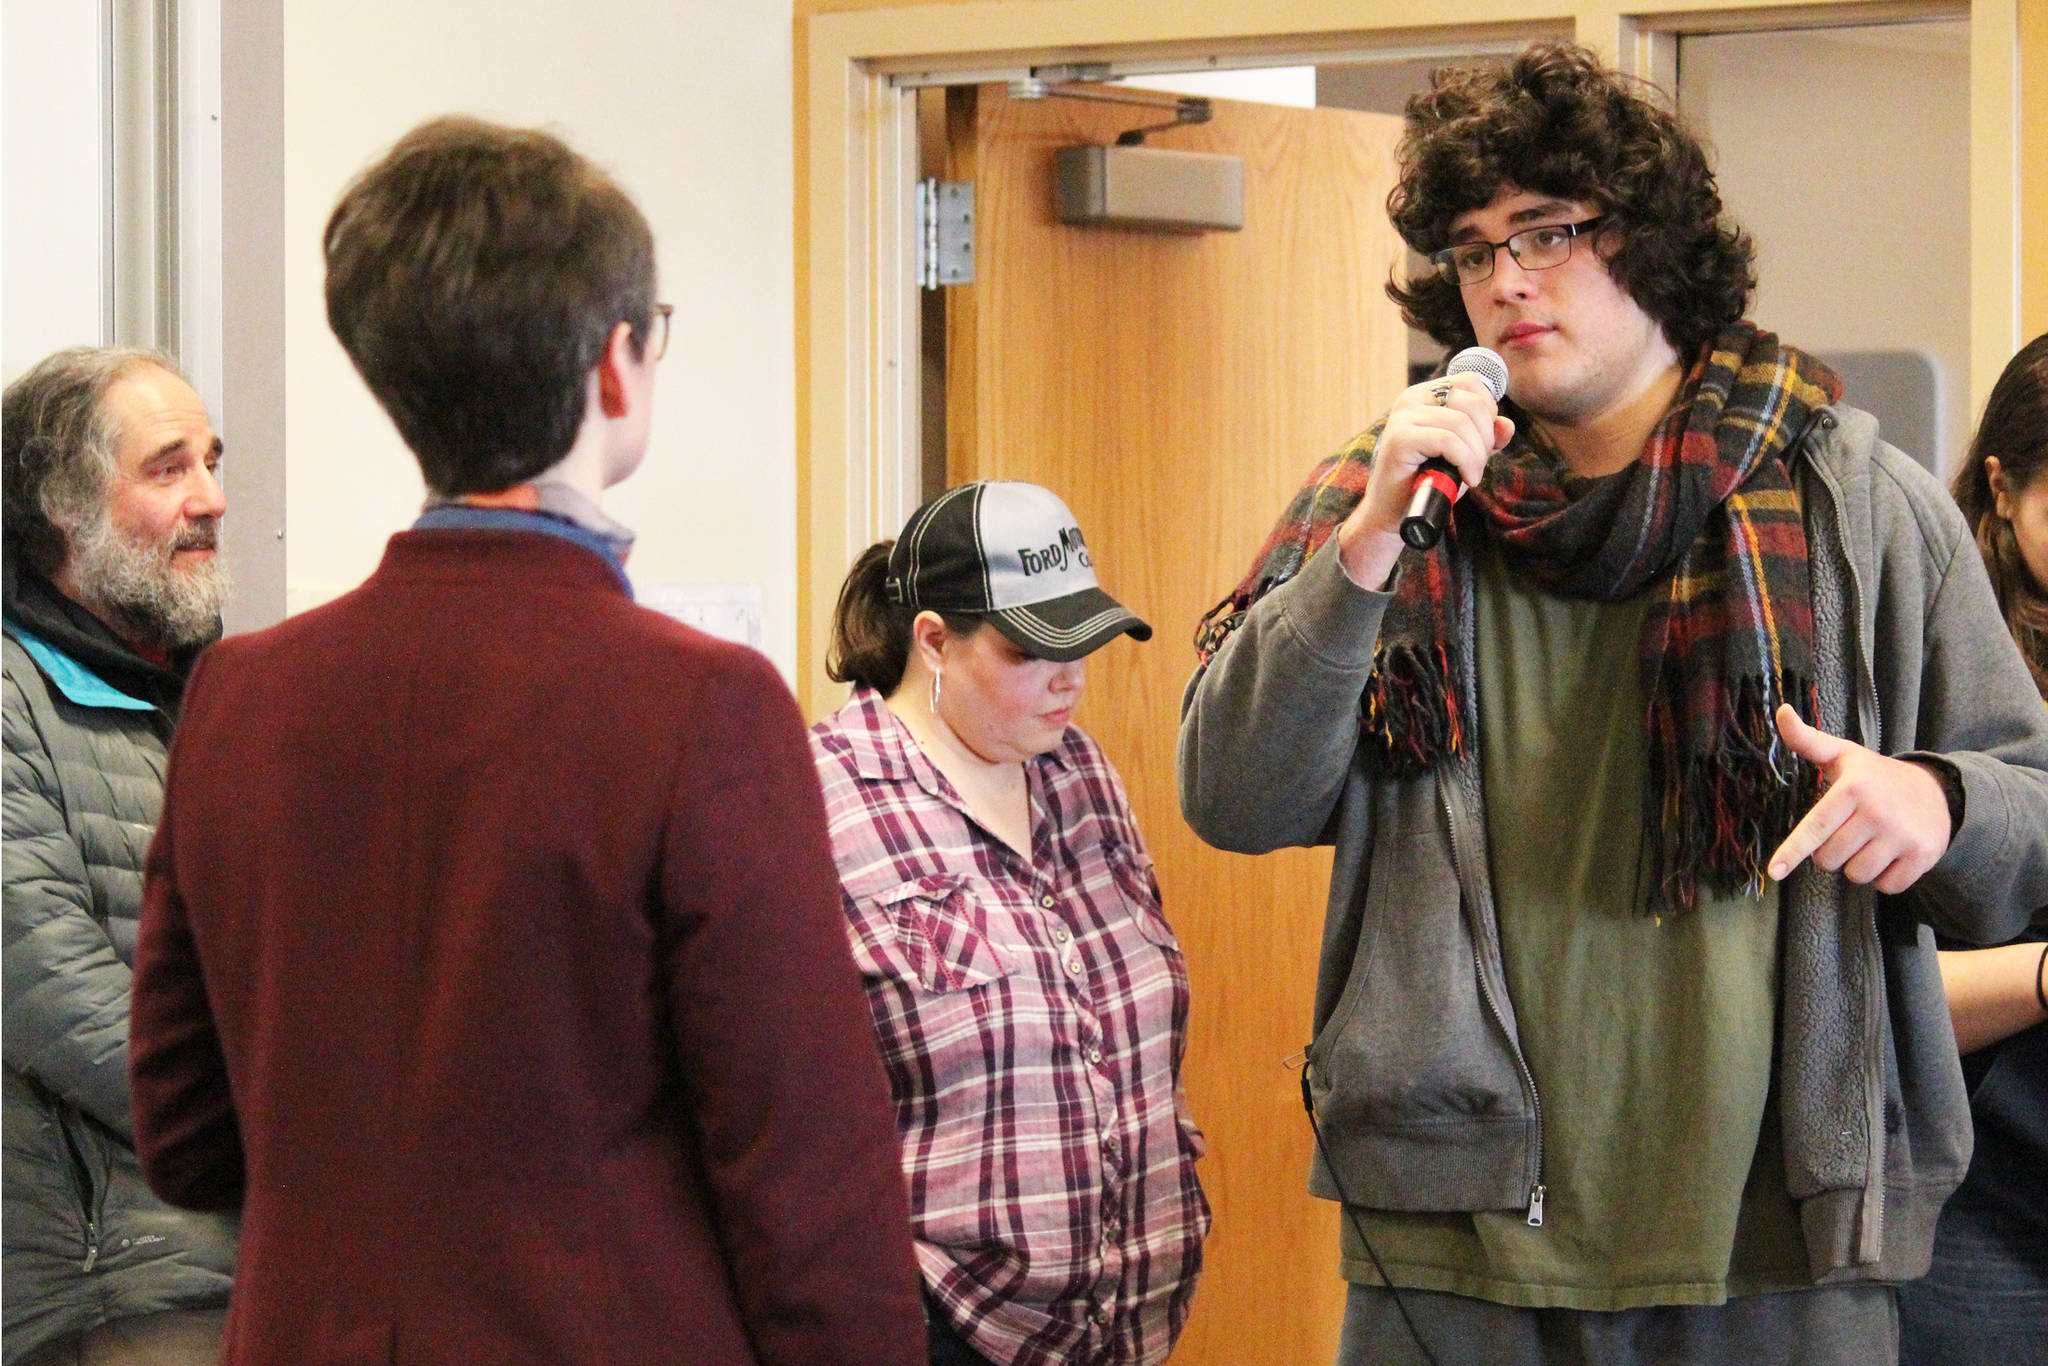 Jesse Roach, a senior at Homer High School, speaks to Rep. Sarah Vance (R-Homer) about the effects of cuts to education at a town hall meeting Saturday, March 2, 2019 at Kachemak Bay Campus in Homer, Alaska. Roach referenced his own experience in the Oklahoma education system after it experienced deep cuts. (Photo by Megan Pacer/Homer News)